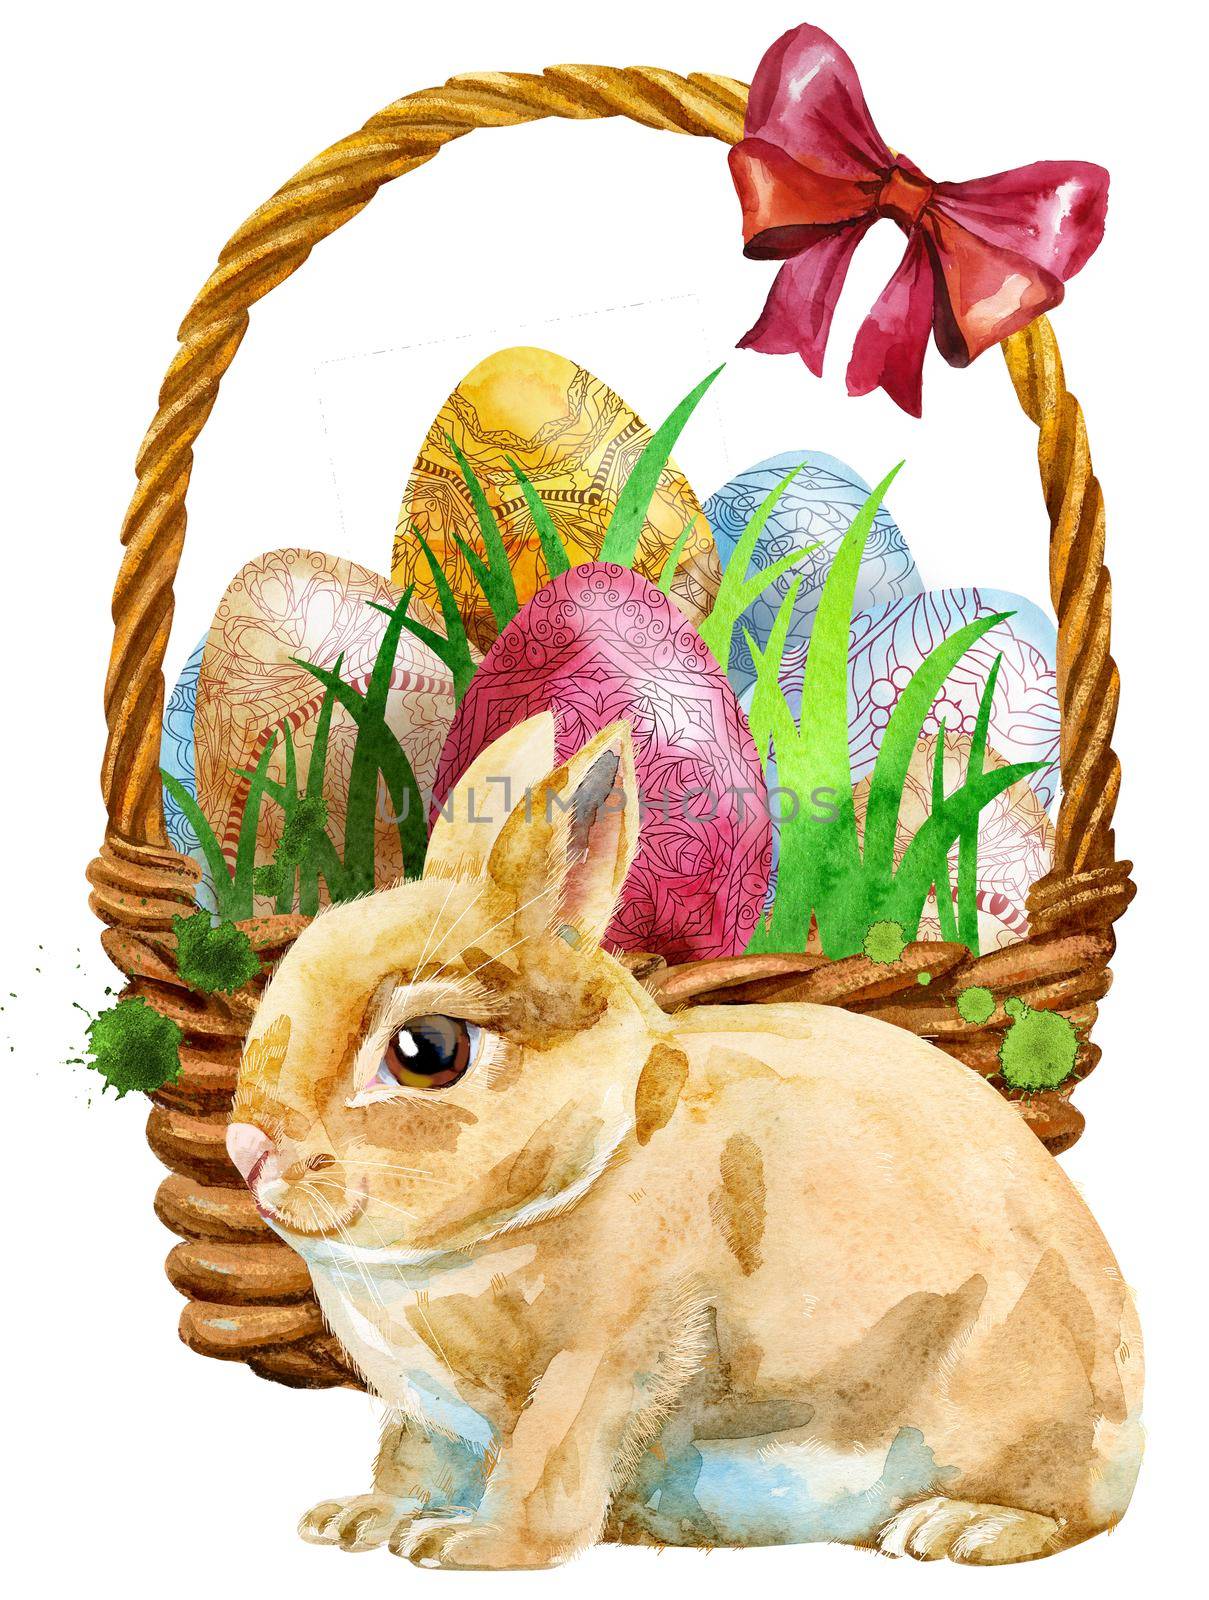 Waterciolor illustration of an Easter basket filled with eggs and a little white Easter rabbit sitting before it